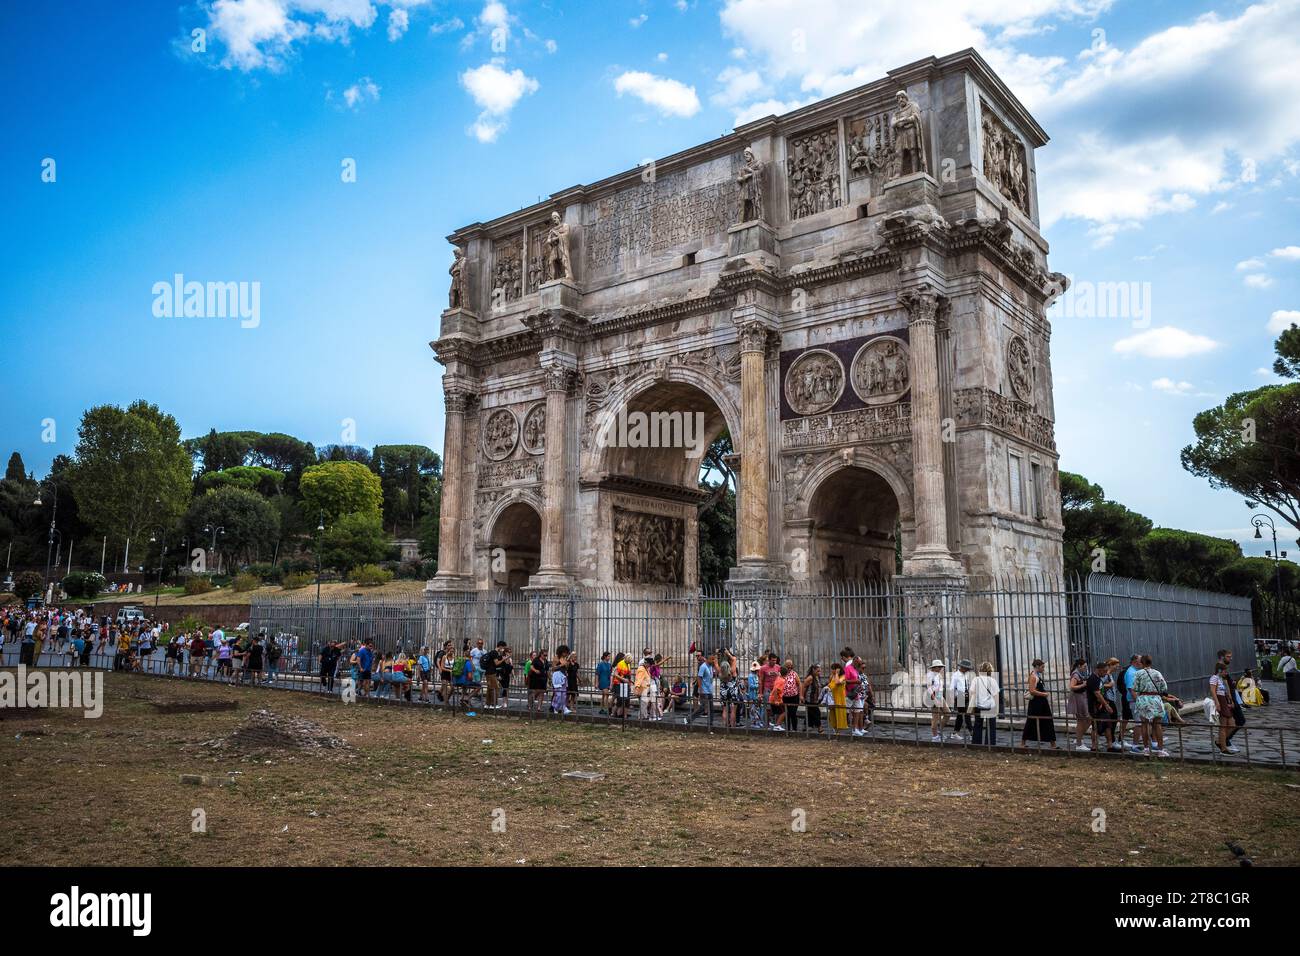 Images from the coliseum in Rome, Italy with tourist crowds Stock Photo